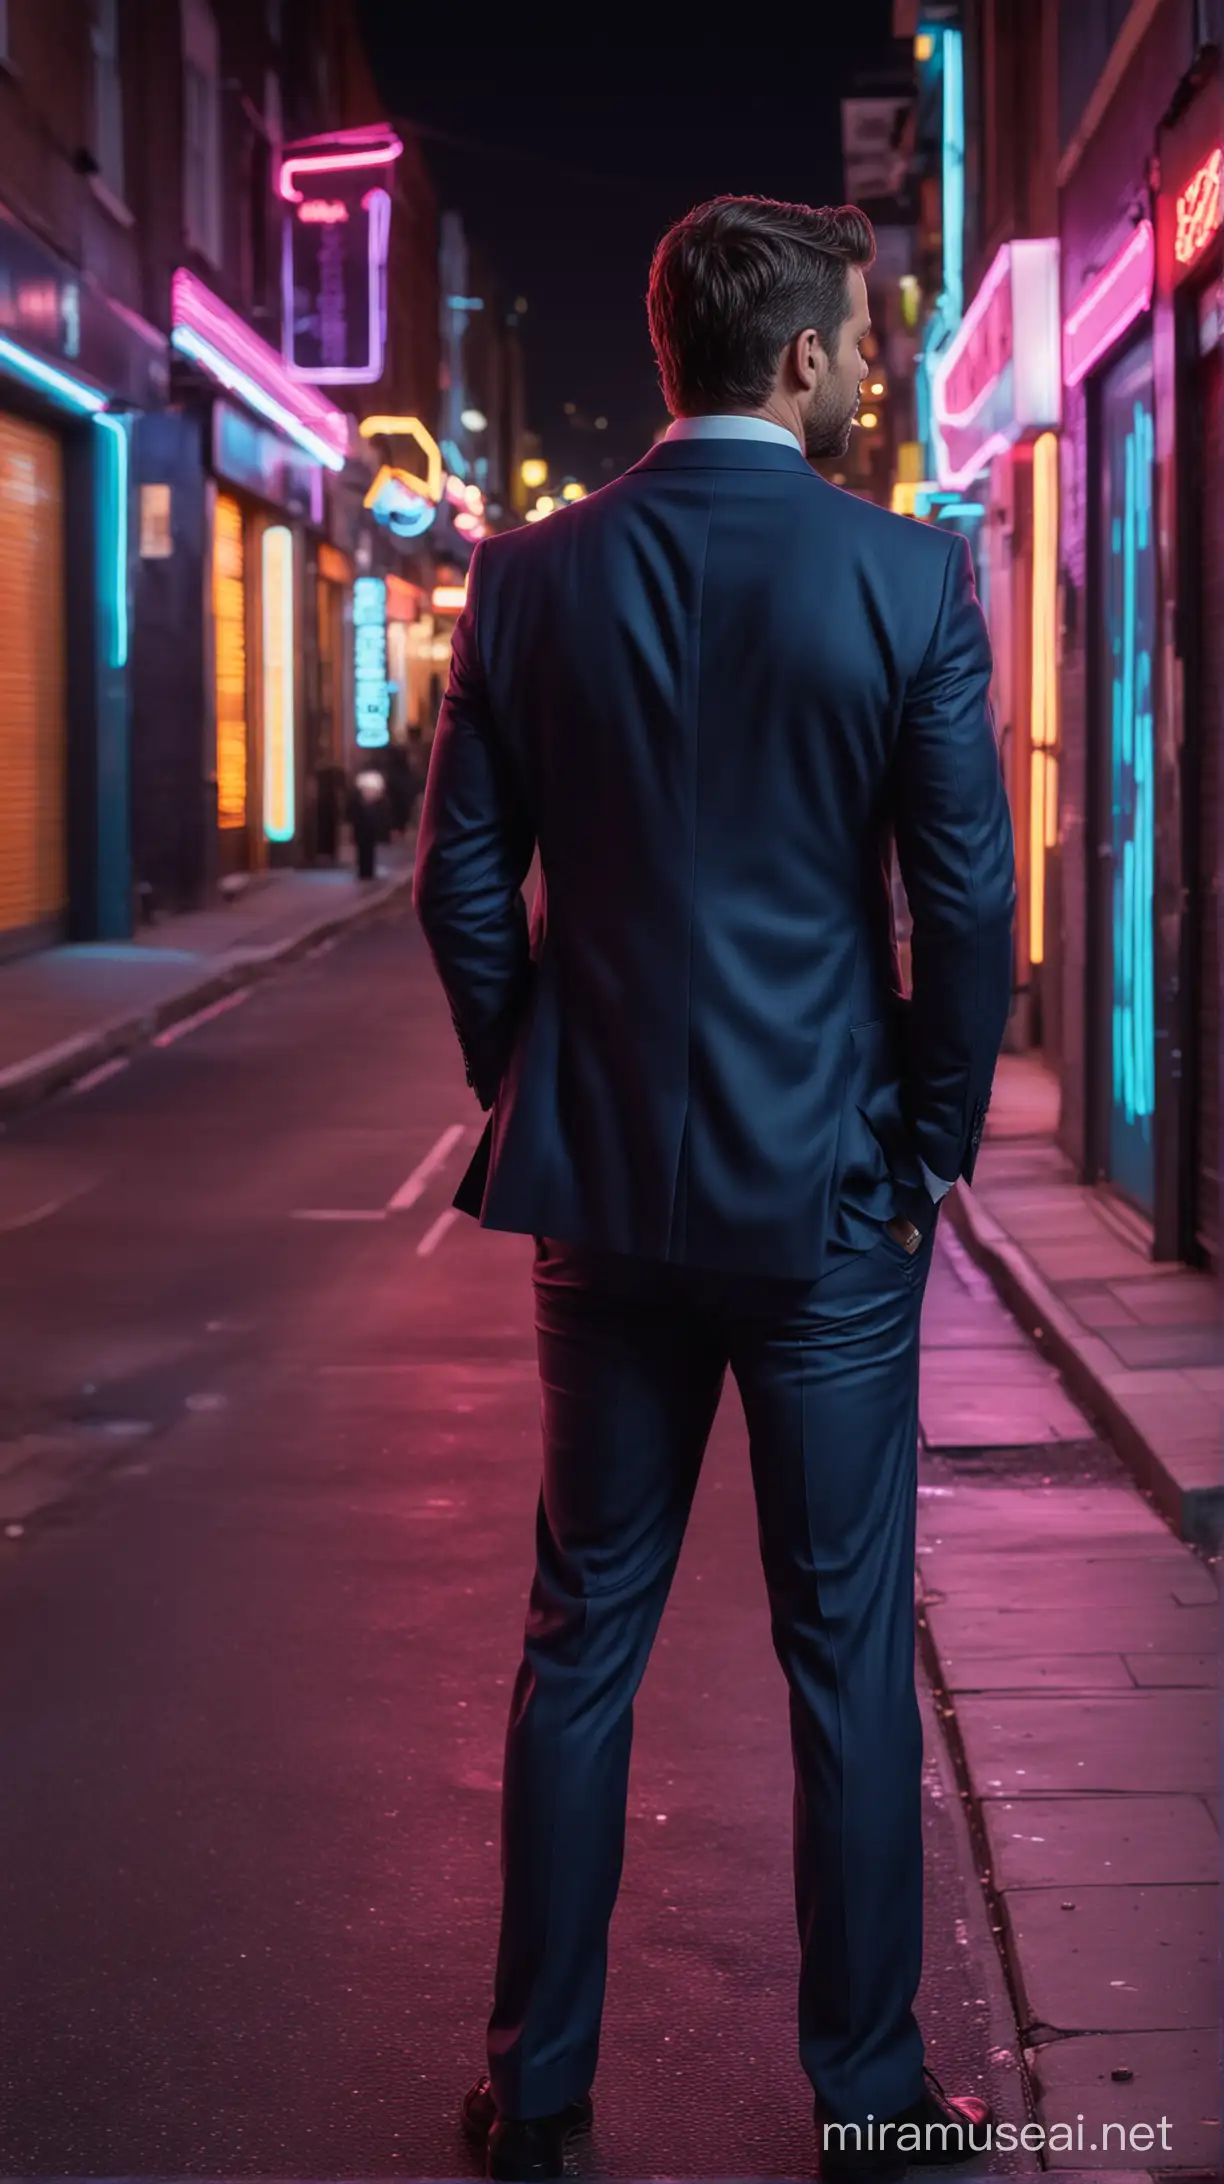 Stylish Young Man in Suit Surrounded by Colorful Night Neons